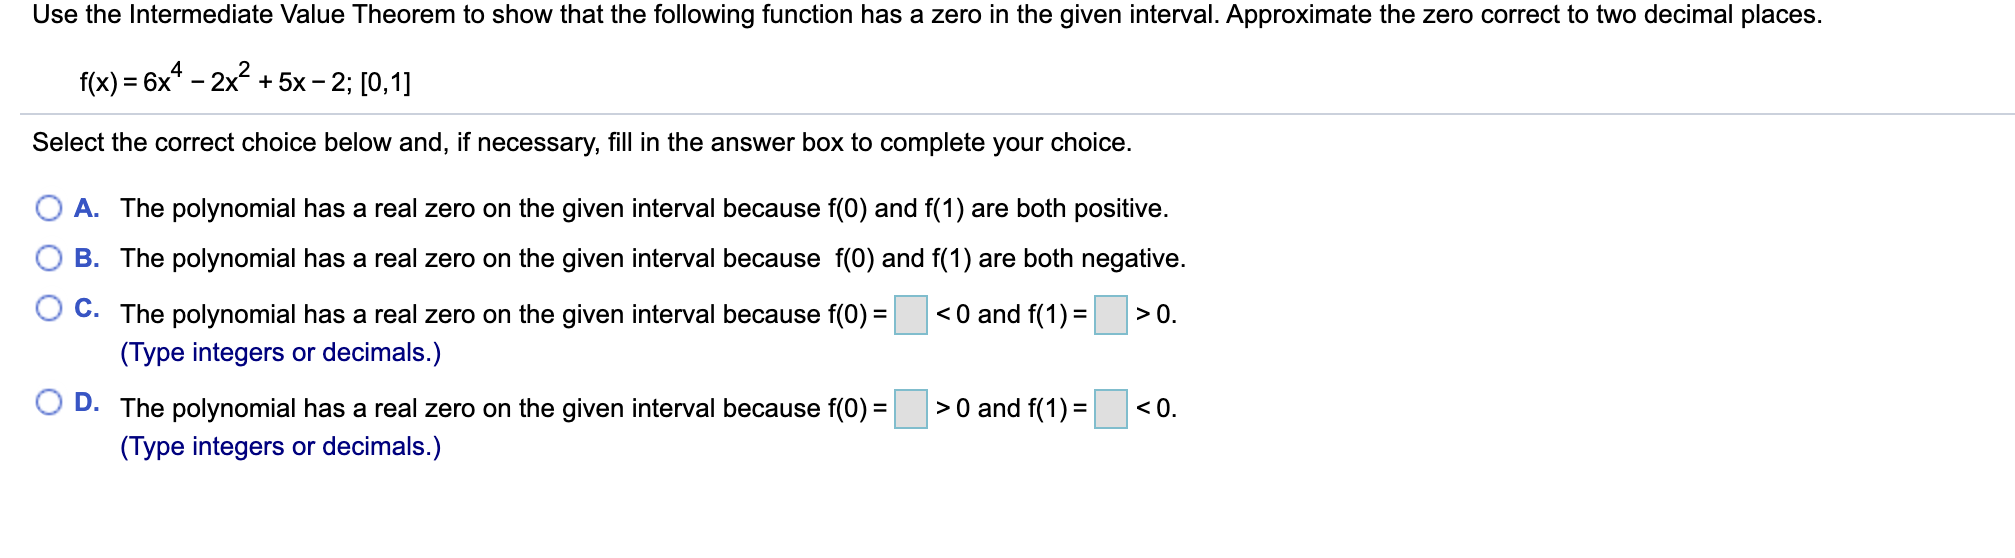 Use the Intermediate Value Theorem to show that the following function has a zero in the given interval. Approximate the zero correct to two decimal places.
f(x) = 6x* – 2x + 5x- 2; [0,1]
Select the correct choice below and, if necessary, fill in the answer box to complete your choice.
A. The polynomial has a real zero on the given interval because f(0) and f(1) are both positive.
B. The polynomial has a real zero on the given interval because f(0) and f(1) are both negative.
C. The polynomial has a real zero on the given interval because f(0) =
<0 and f(1) =
>0.
(Type integers or decimals.)
> 0 and f(1) =
<0.
D. The polynomial has a real zero on the given interval because f(0) =
(Type integers or decimals.)
%3D
